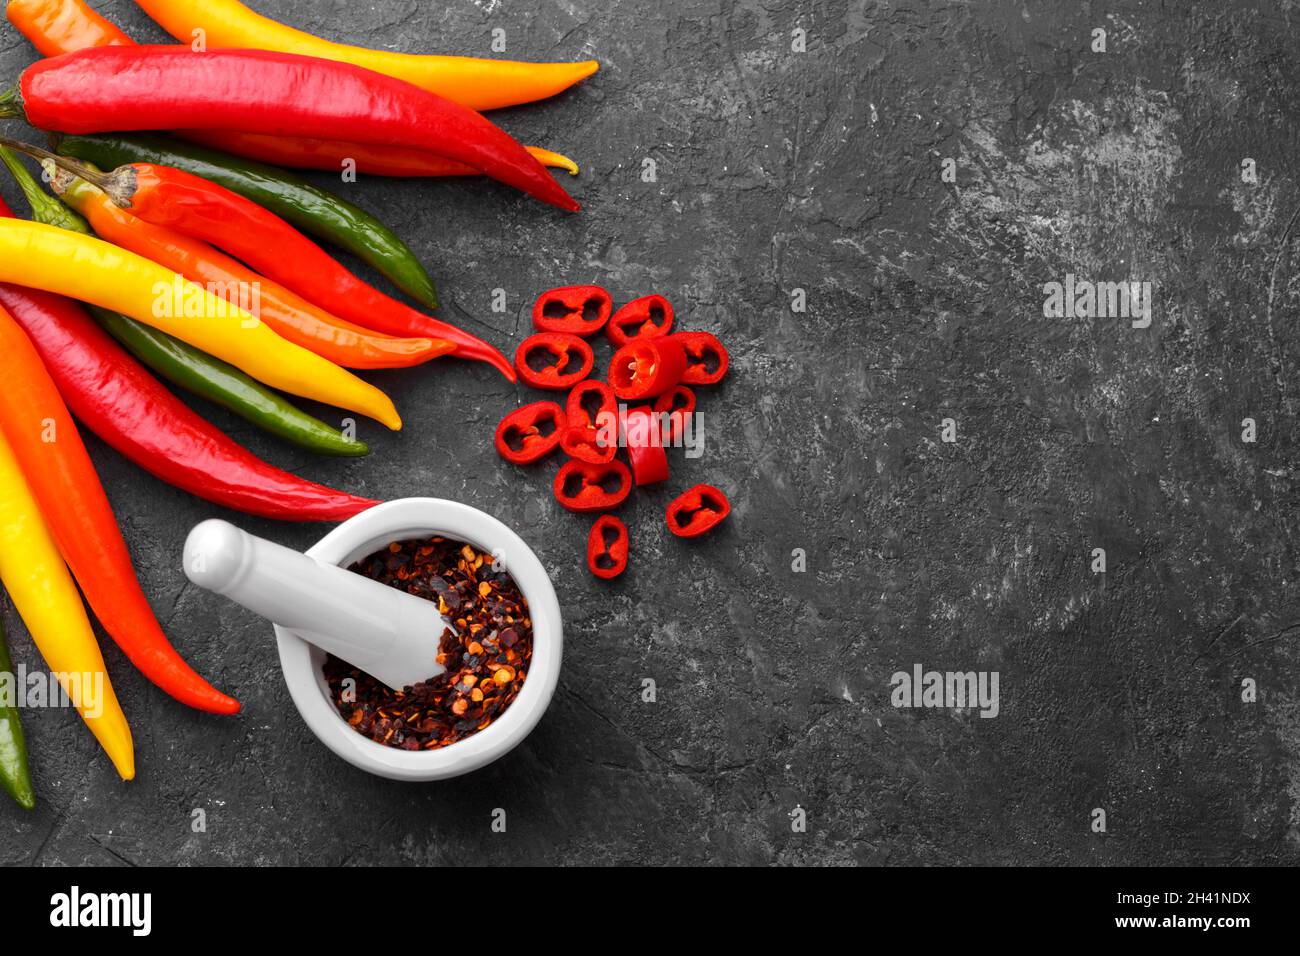 Red, yellow and green chili peppers Stock Photo